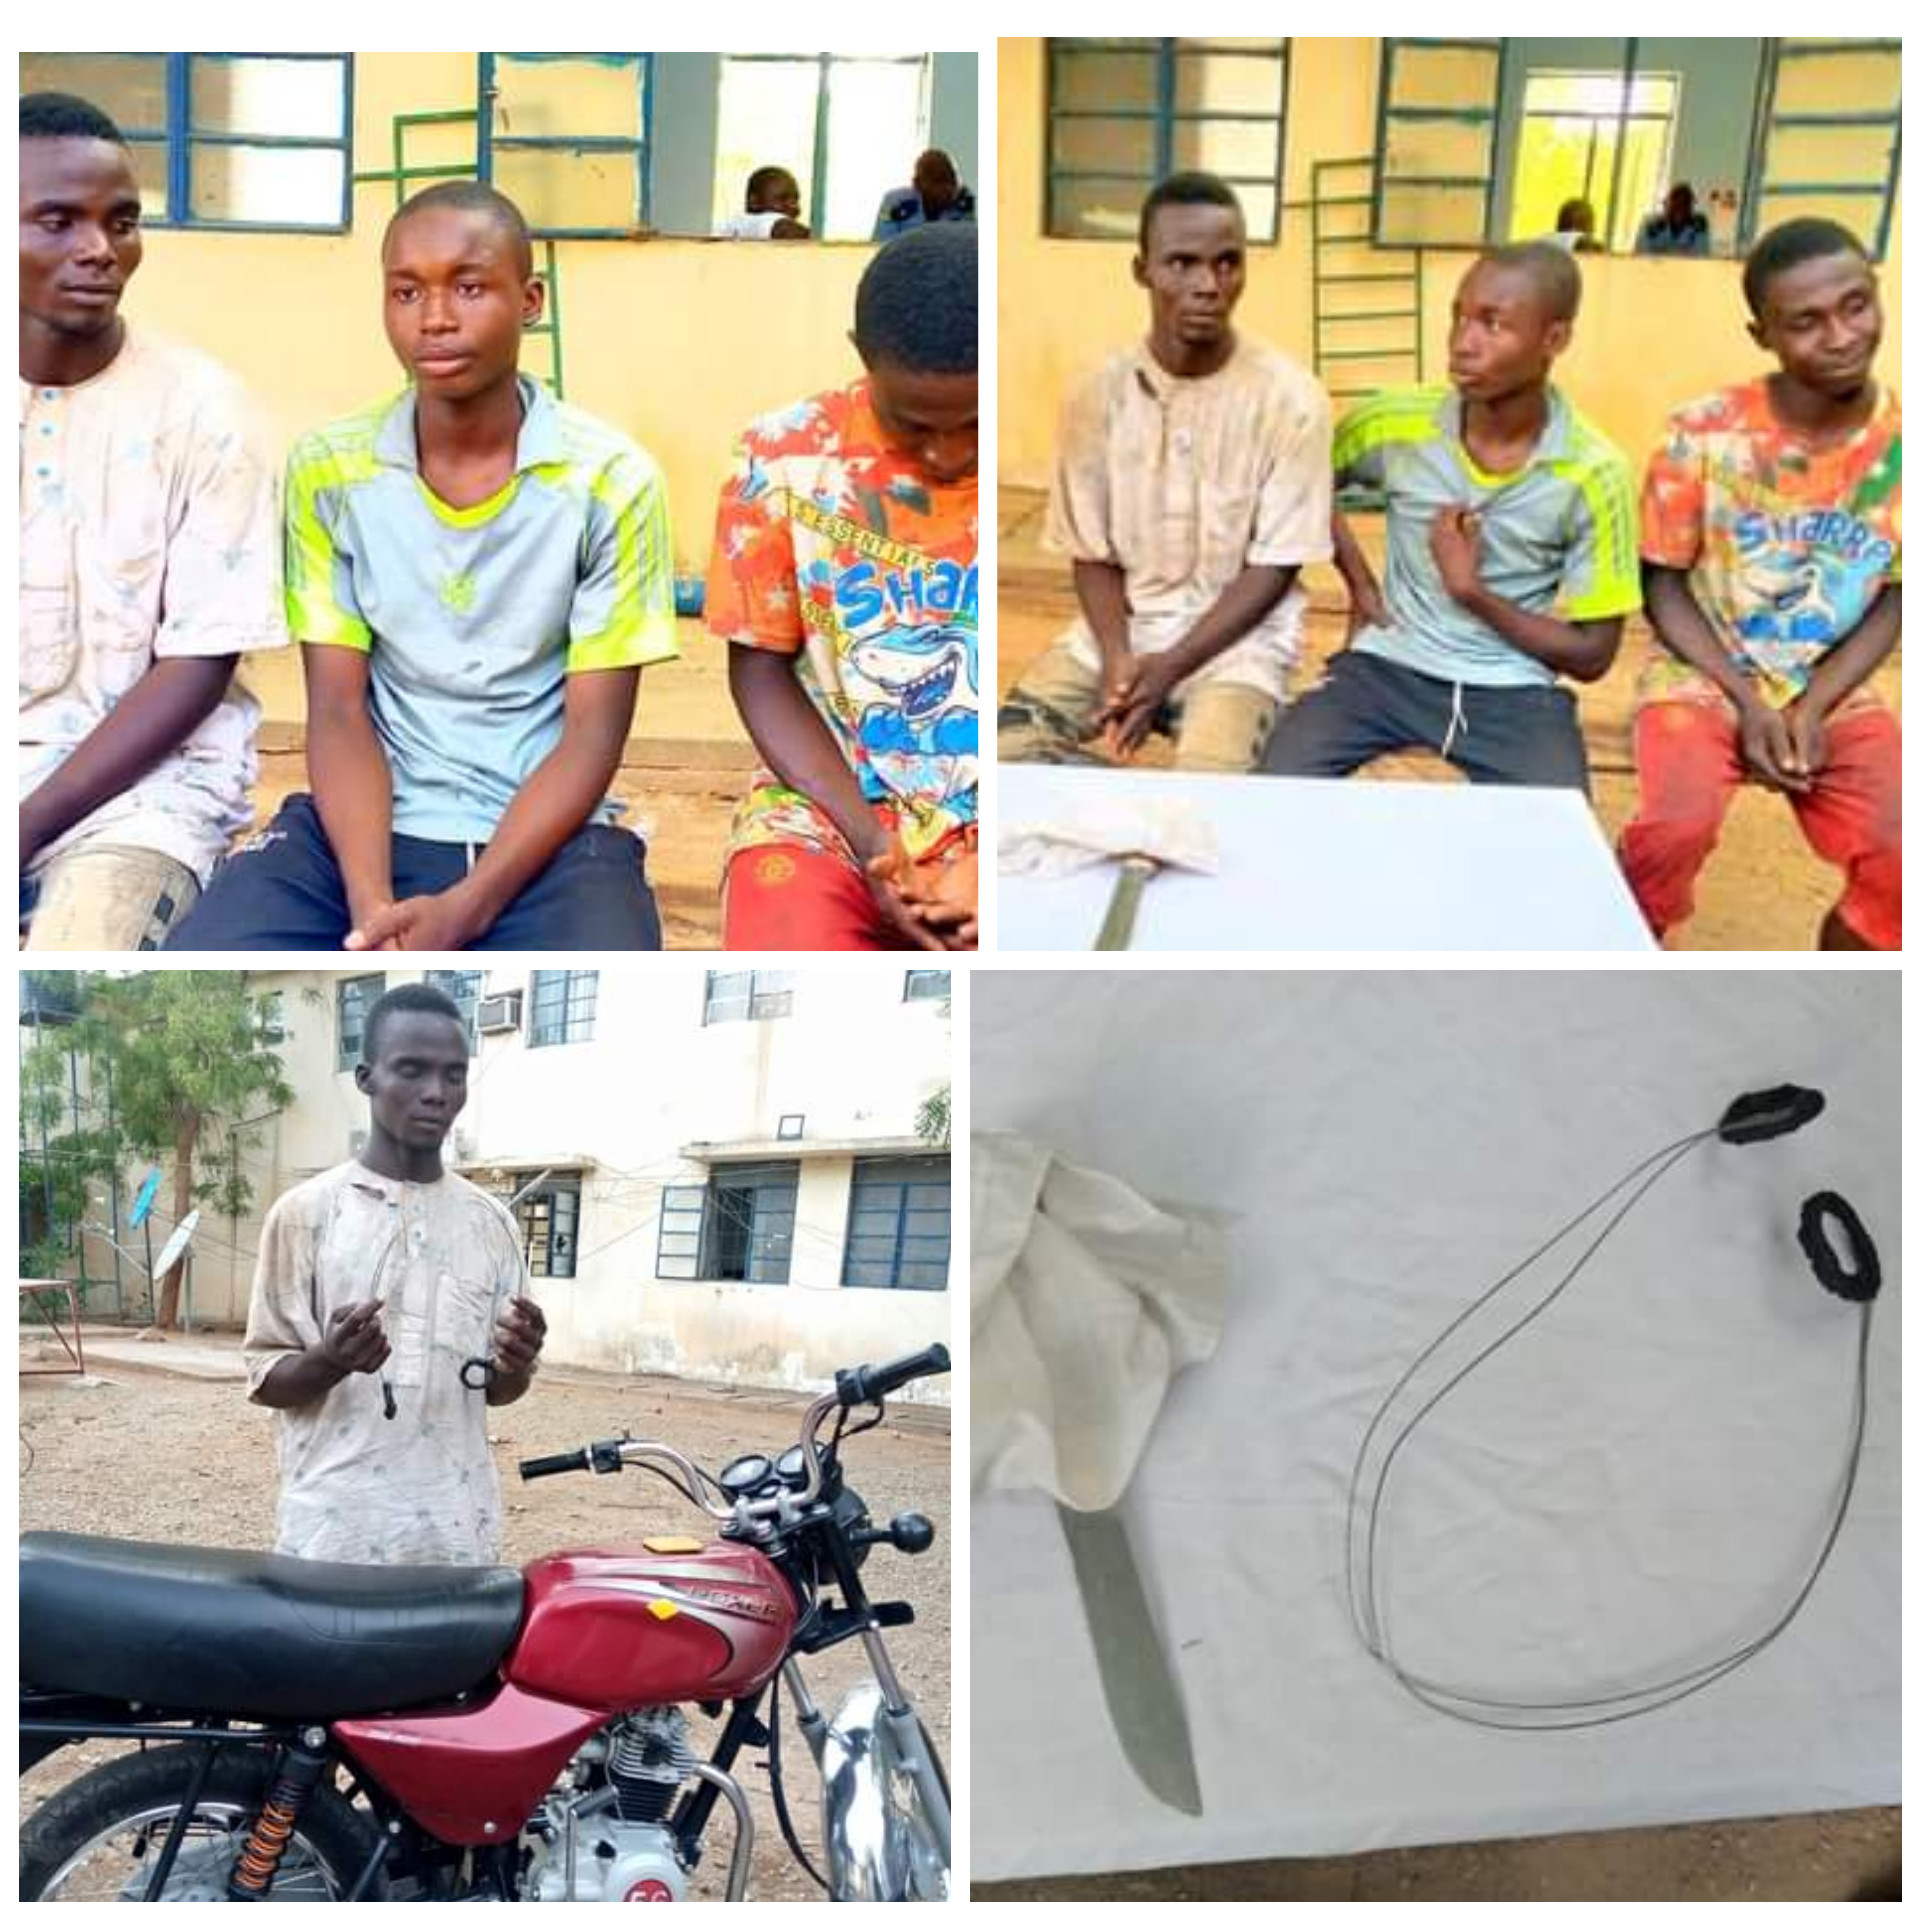 Katsina police bust notorious syndicate of armed robbers and motorcycle snatchers who strangle victims to death using cable wires